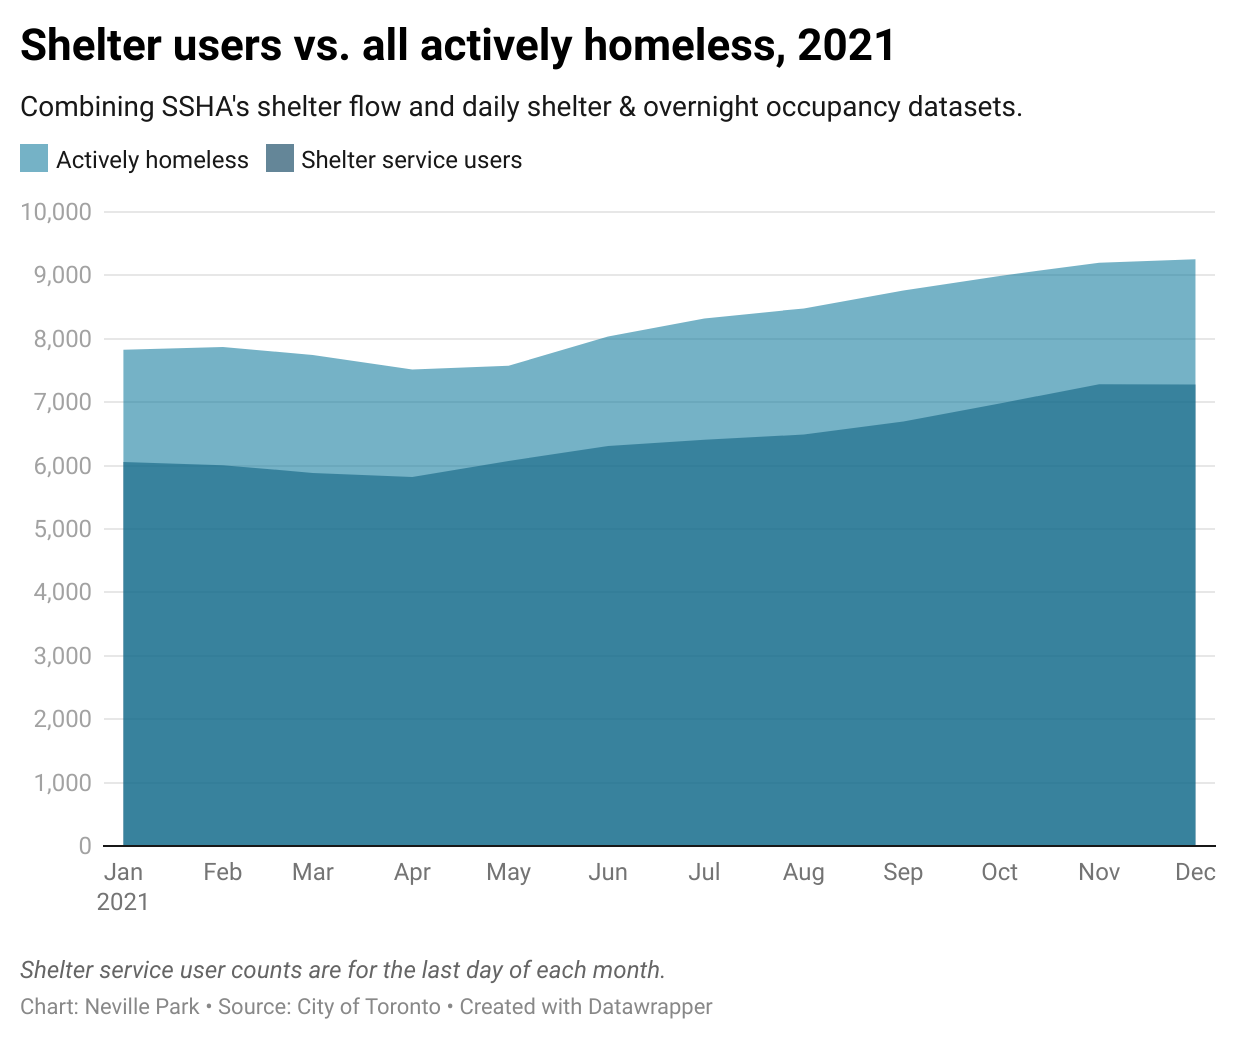 2021 numbers show a gap of about 1500-2000 between the "actively homeless" population and the total number of shelter users.